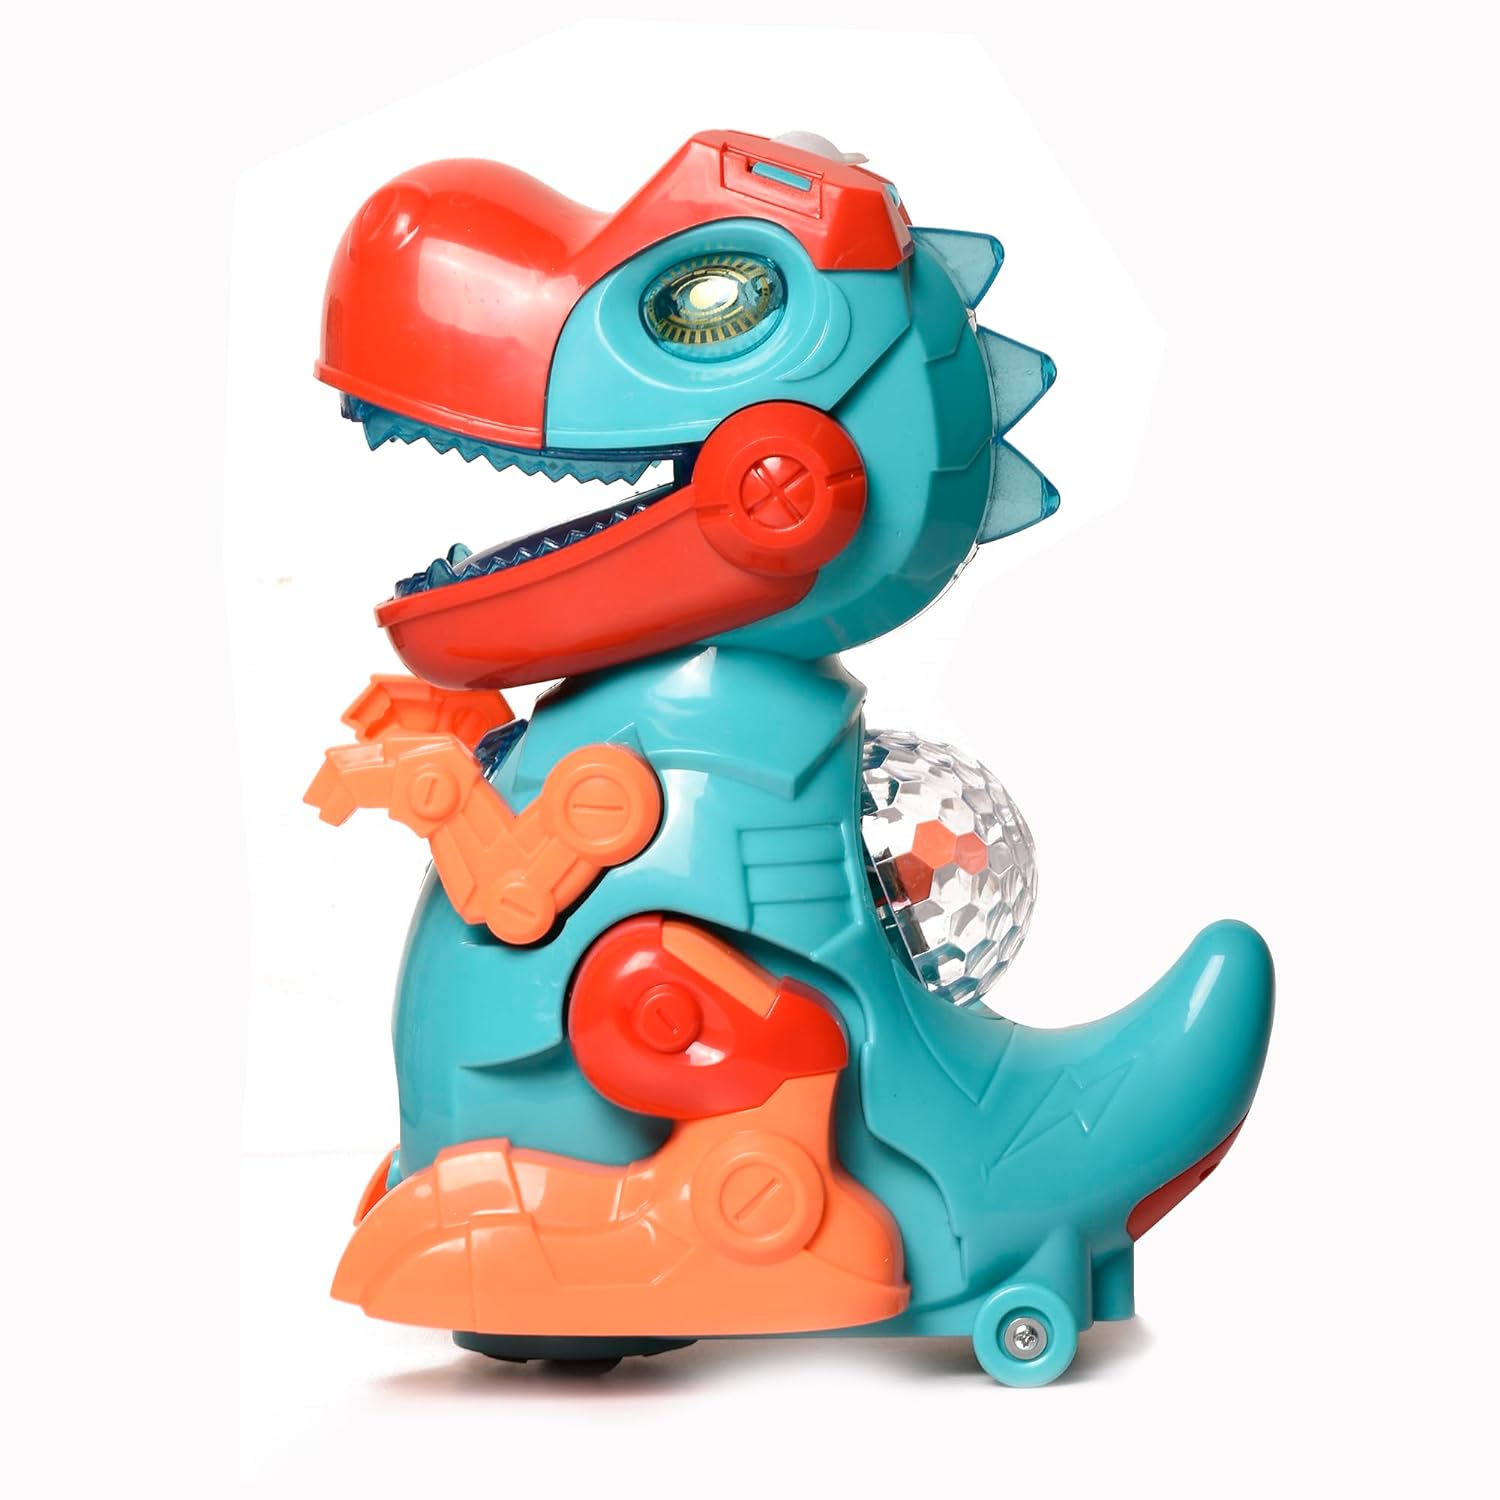 Braintastic Dinosaur Musical Toy with Flashing Lights and Sounds Learning Early Development Toys for Kids Age 3+ Years